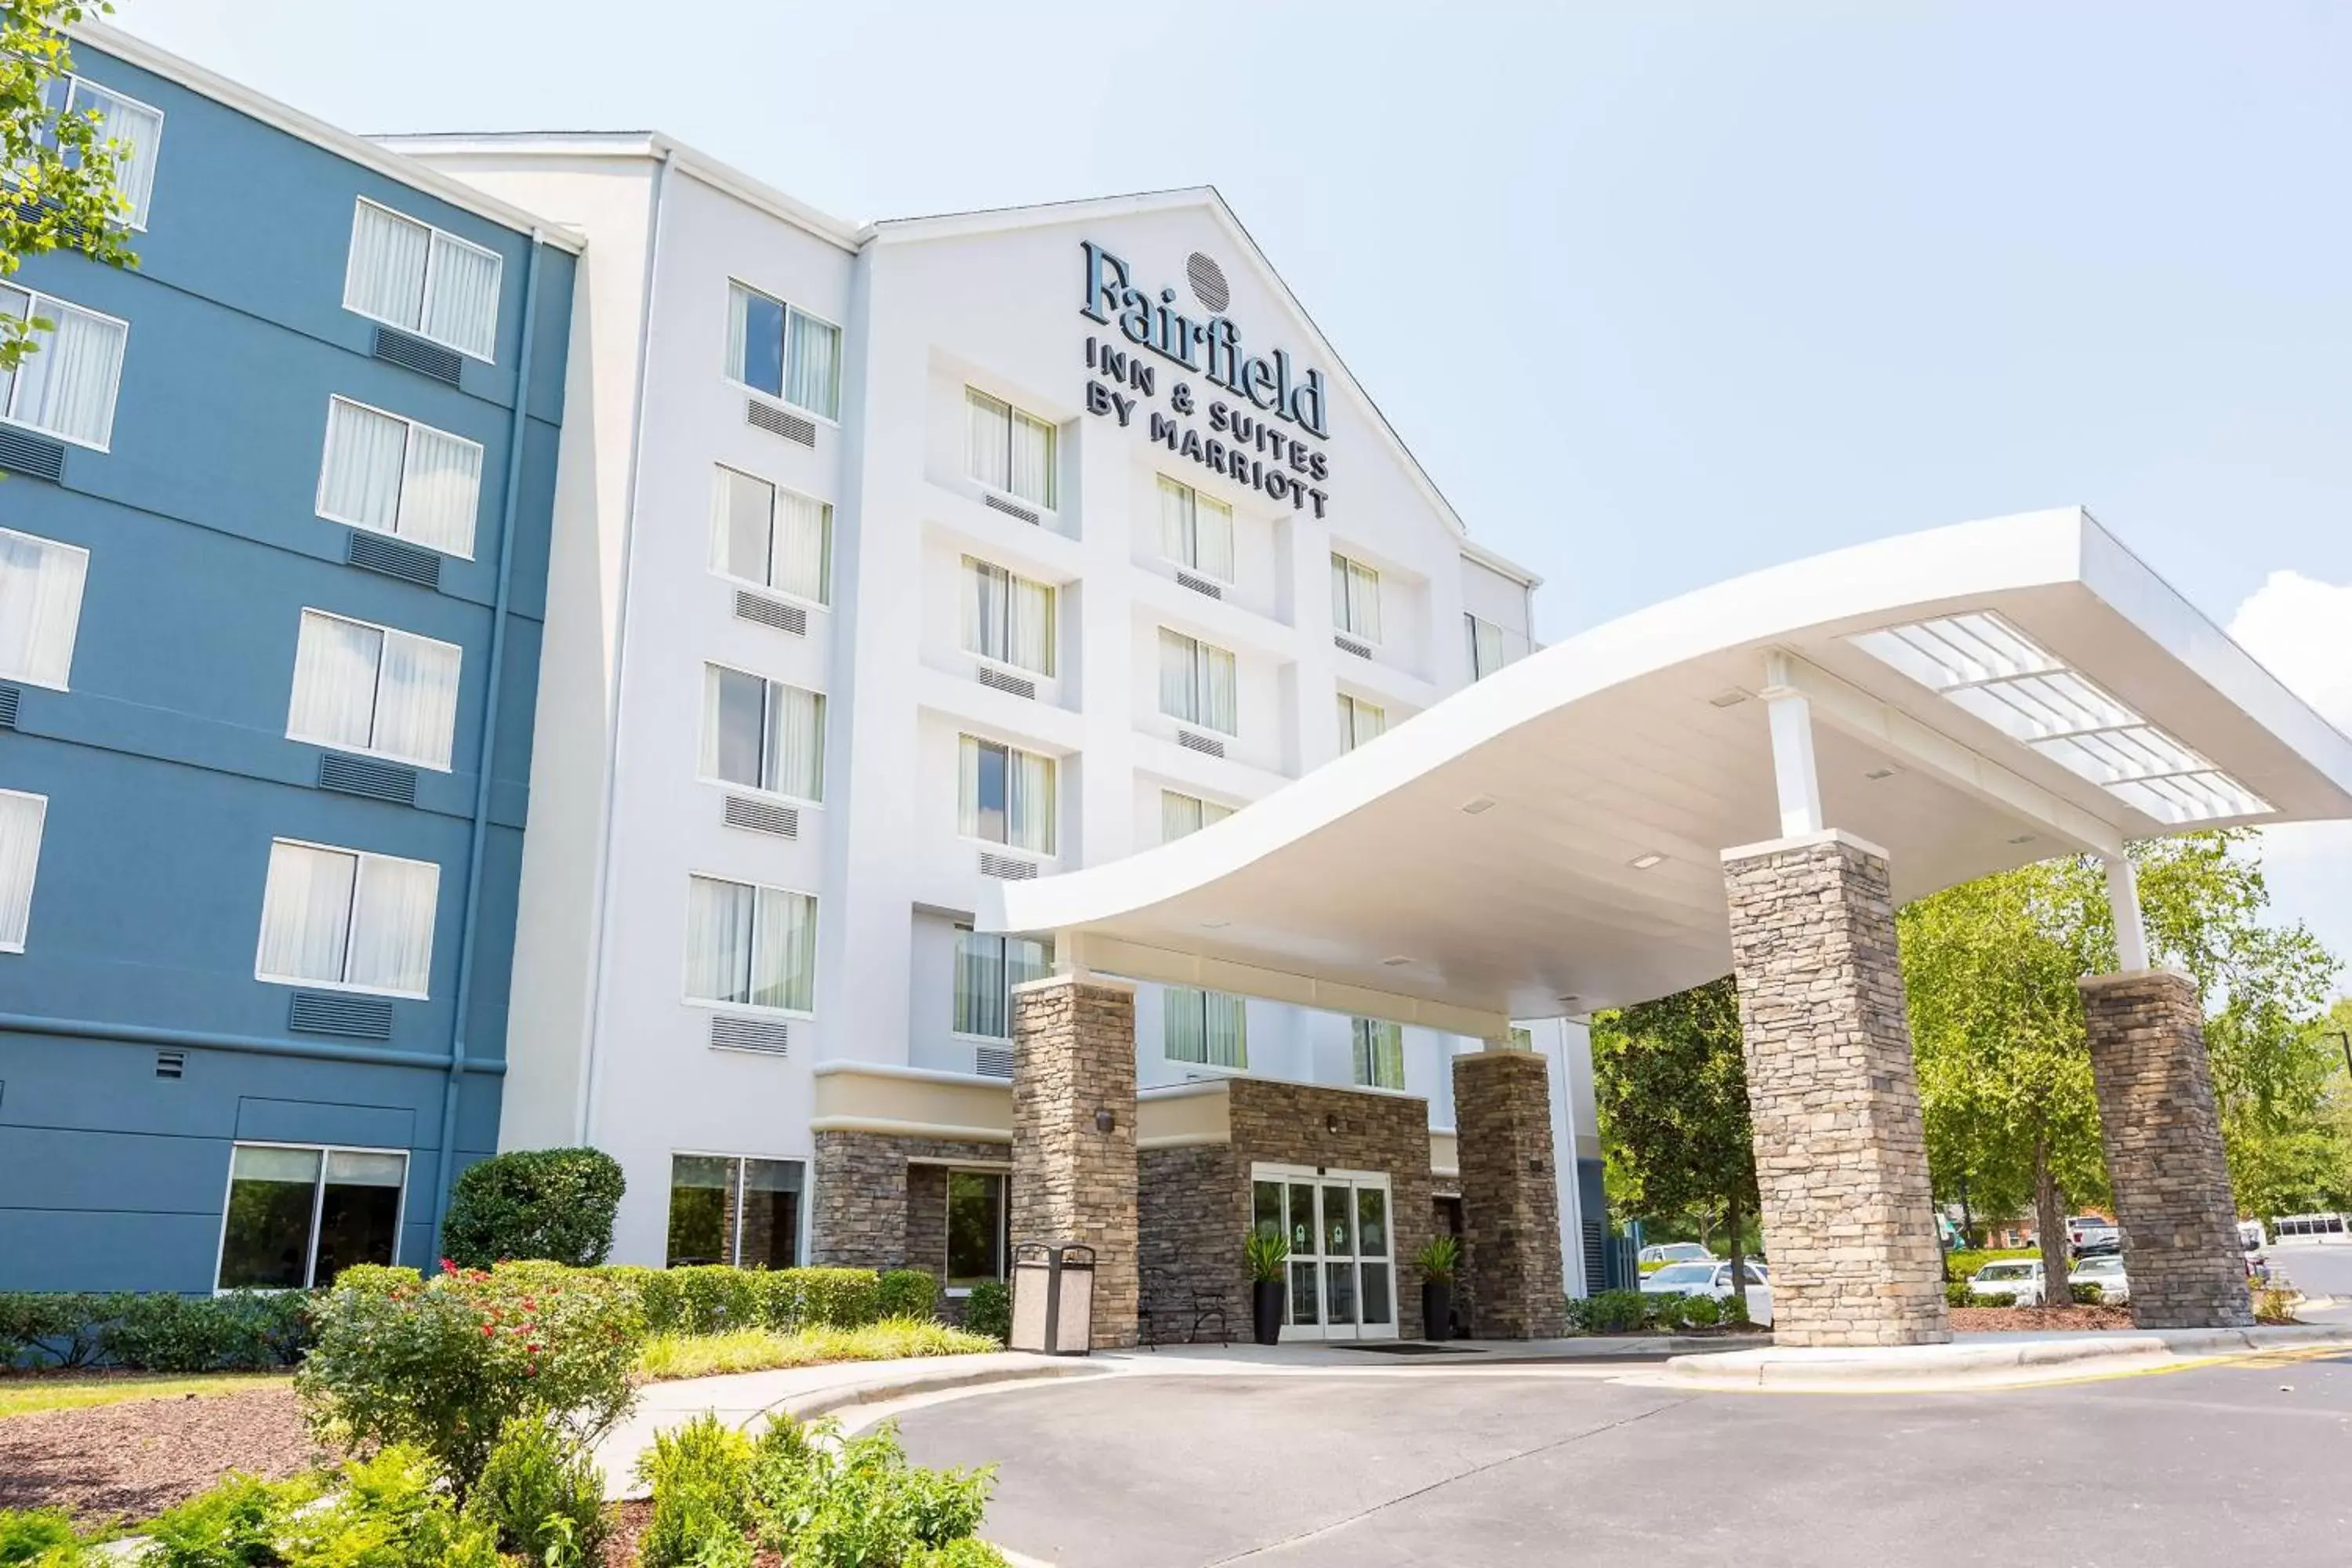 Property Building in Fairfield Inn & Suites Raleigh Durham Airport Research Triangle Park